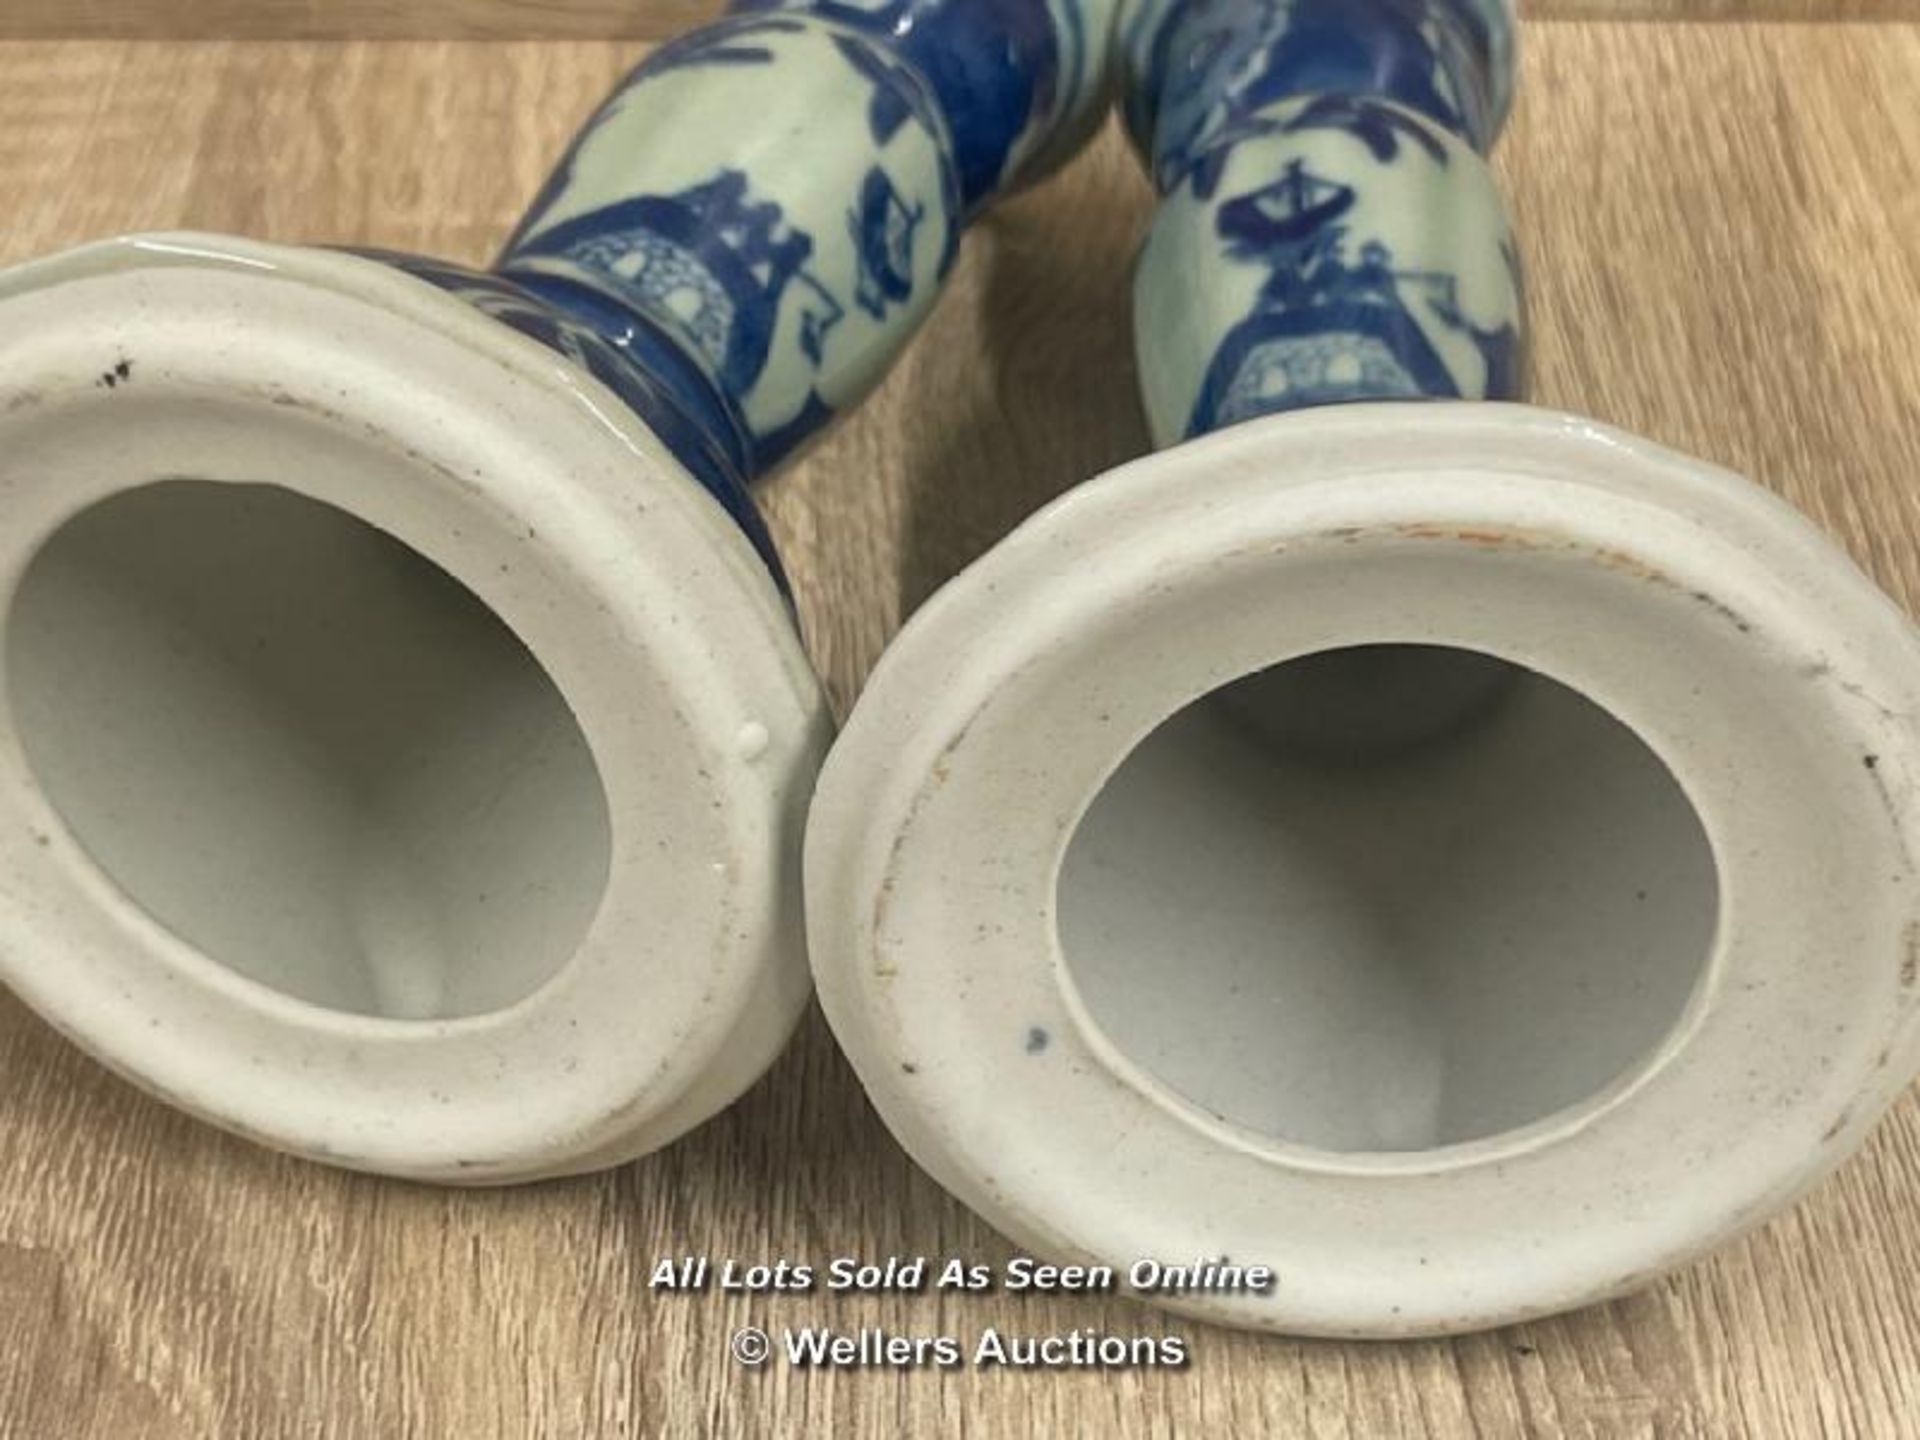 A PAIR OF CHINESE BLUE & WHITE CANDLE HOLDERS DECORATED WITH SCENERY.17.6CM HIGH - Image 4 of 4